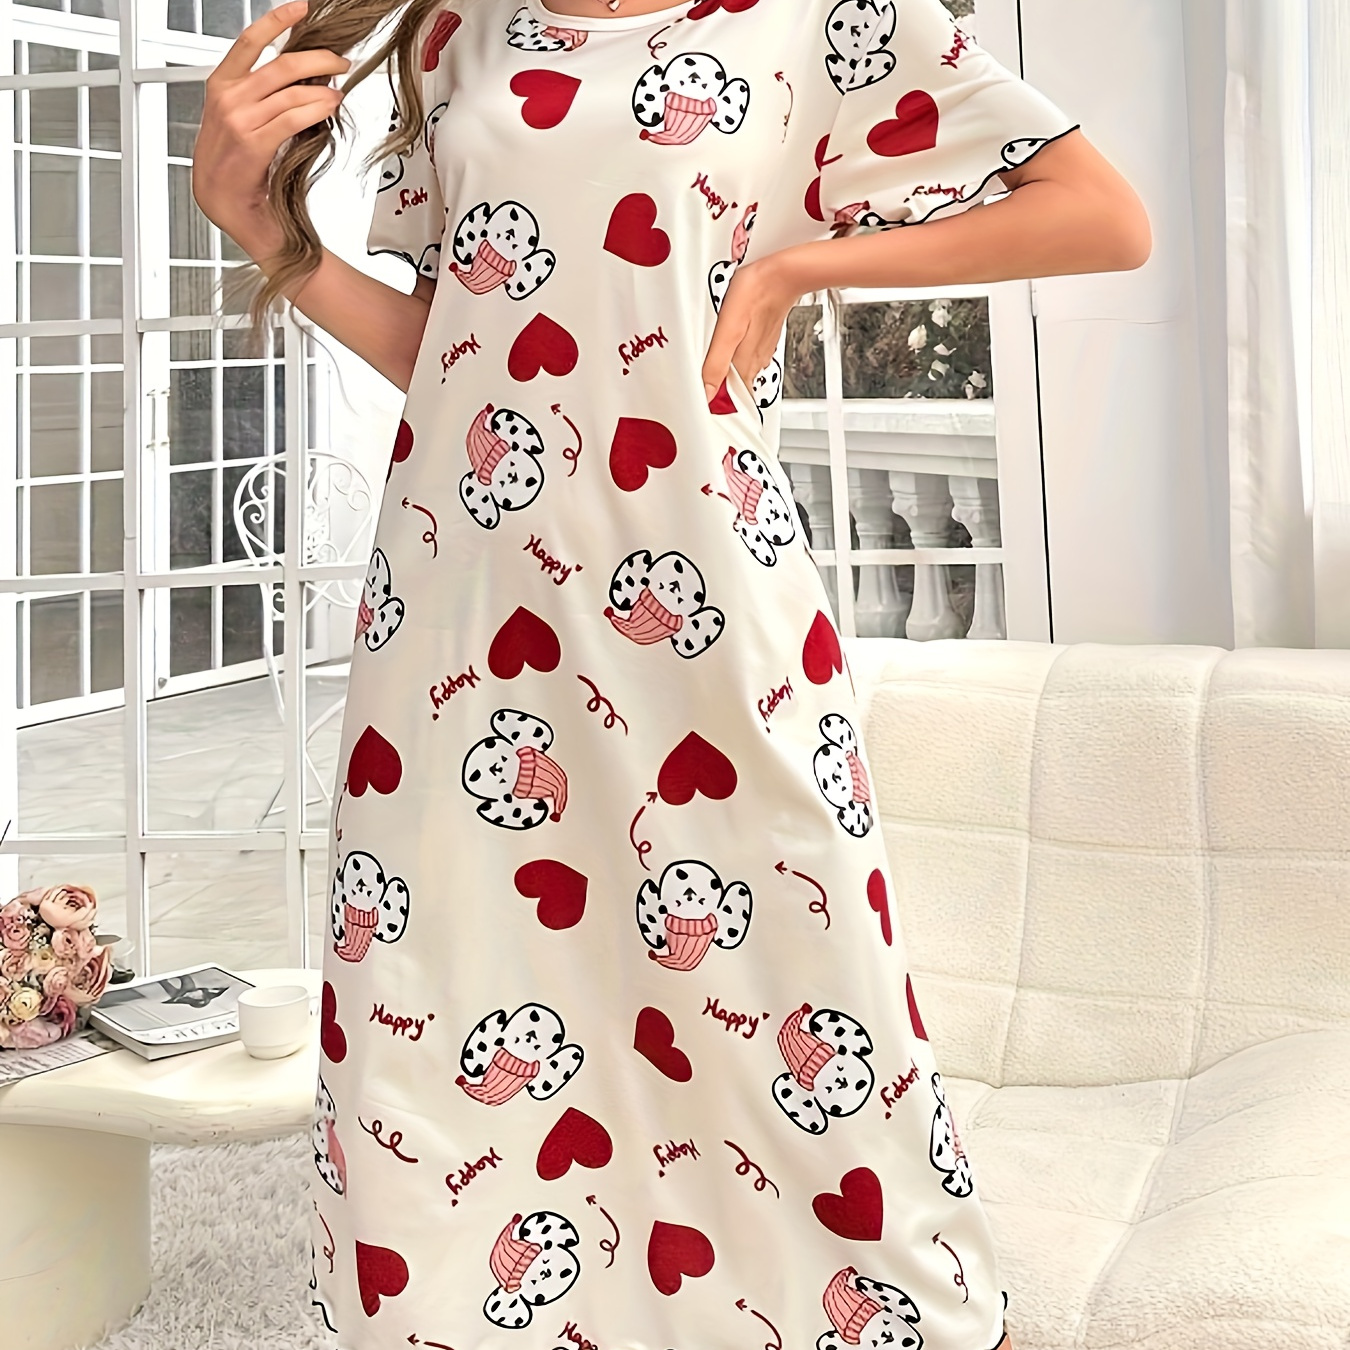 

Women's Short Sleeve T-shirt Nightgown, Casual Spotted Puppy And Heart Print, Comfortable Sleepwear Dress